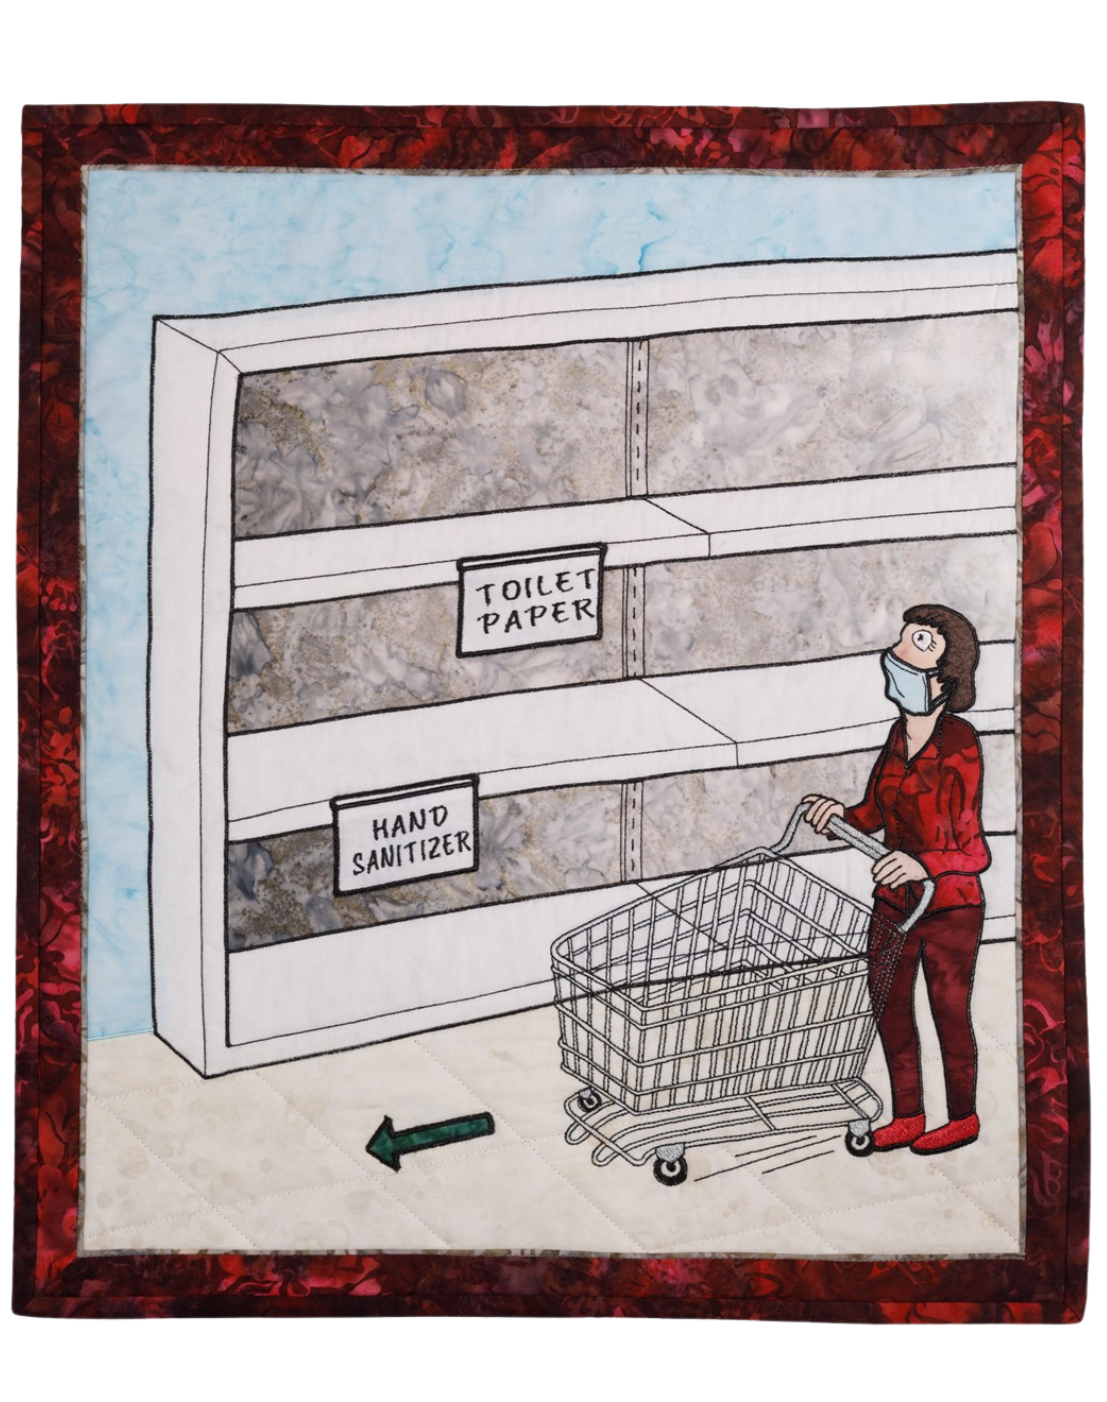 A political cartoon of a grocery store shopper pushing a cart past empty shelves labelled "Toilet Paper" and "Hand Sanitizer".